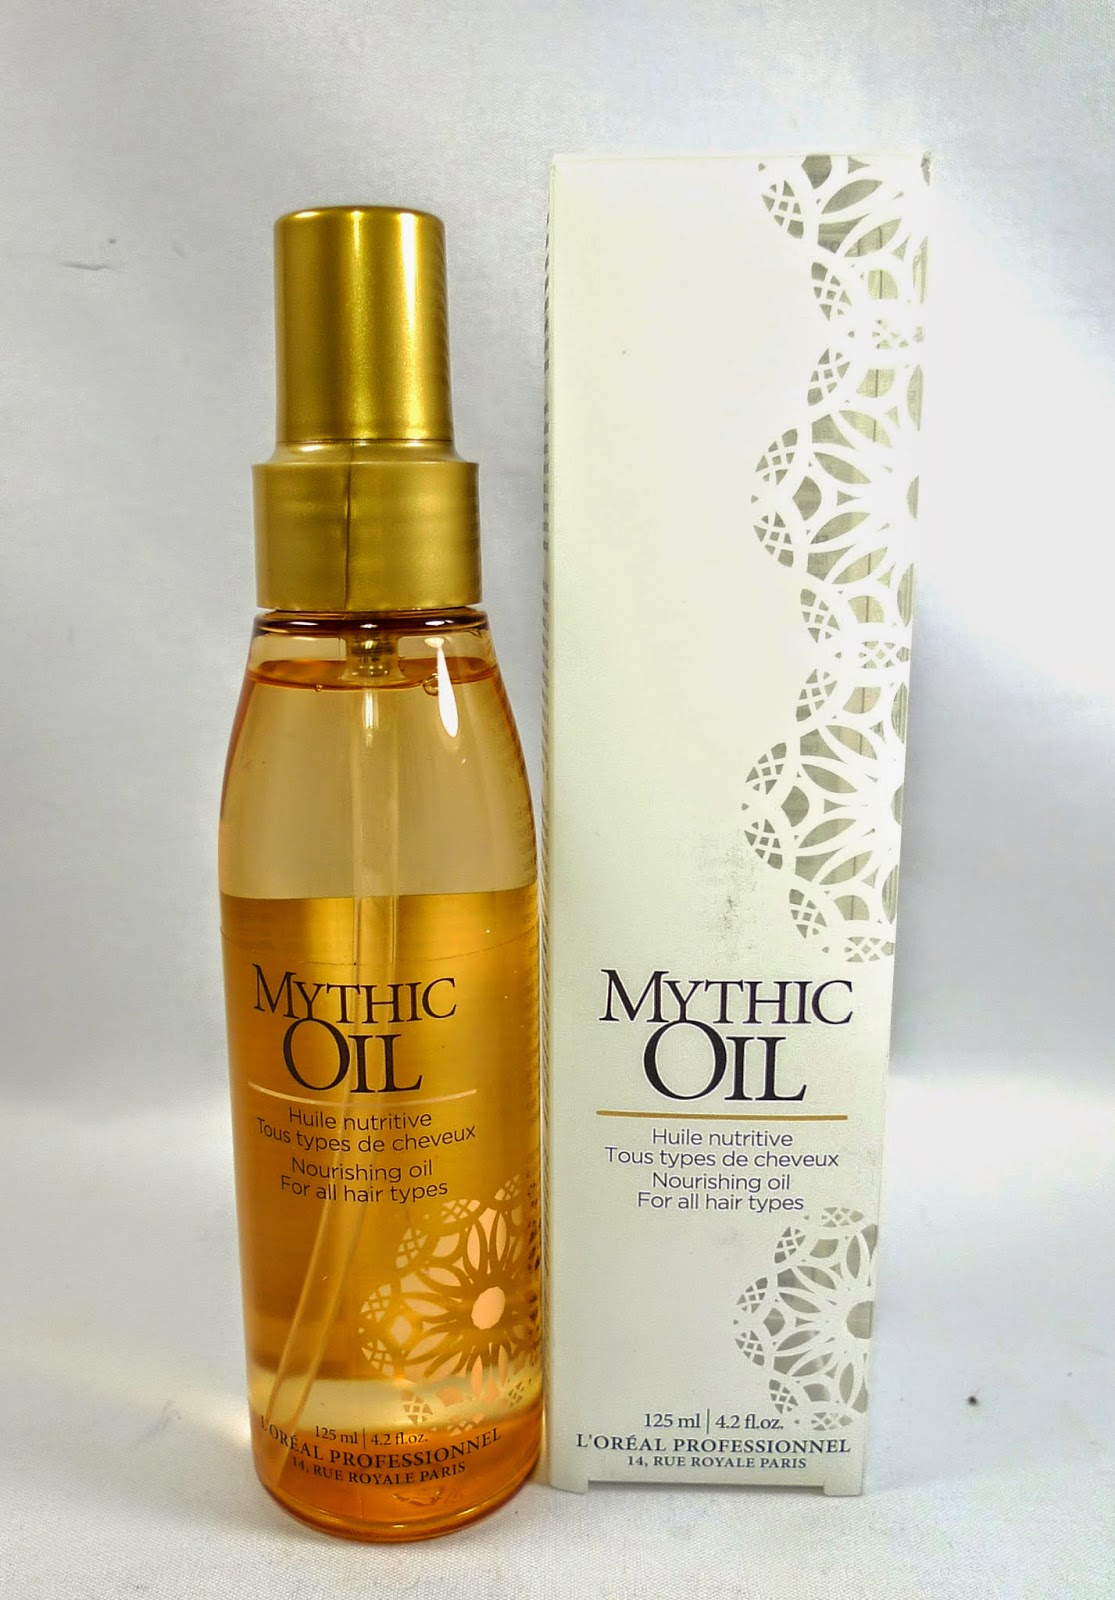 L'oreal Mythic Oil Review